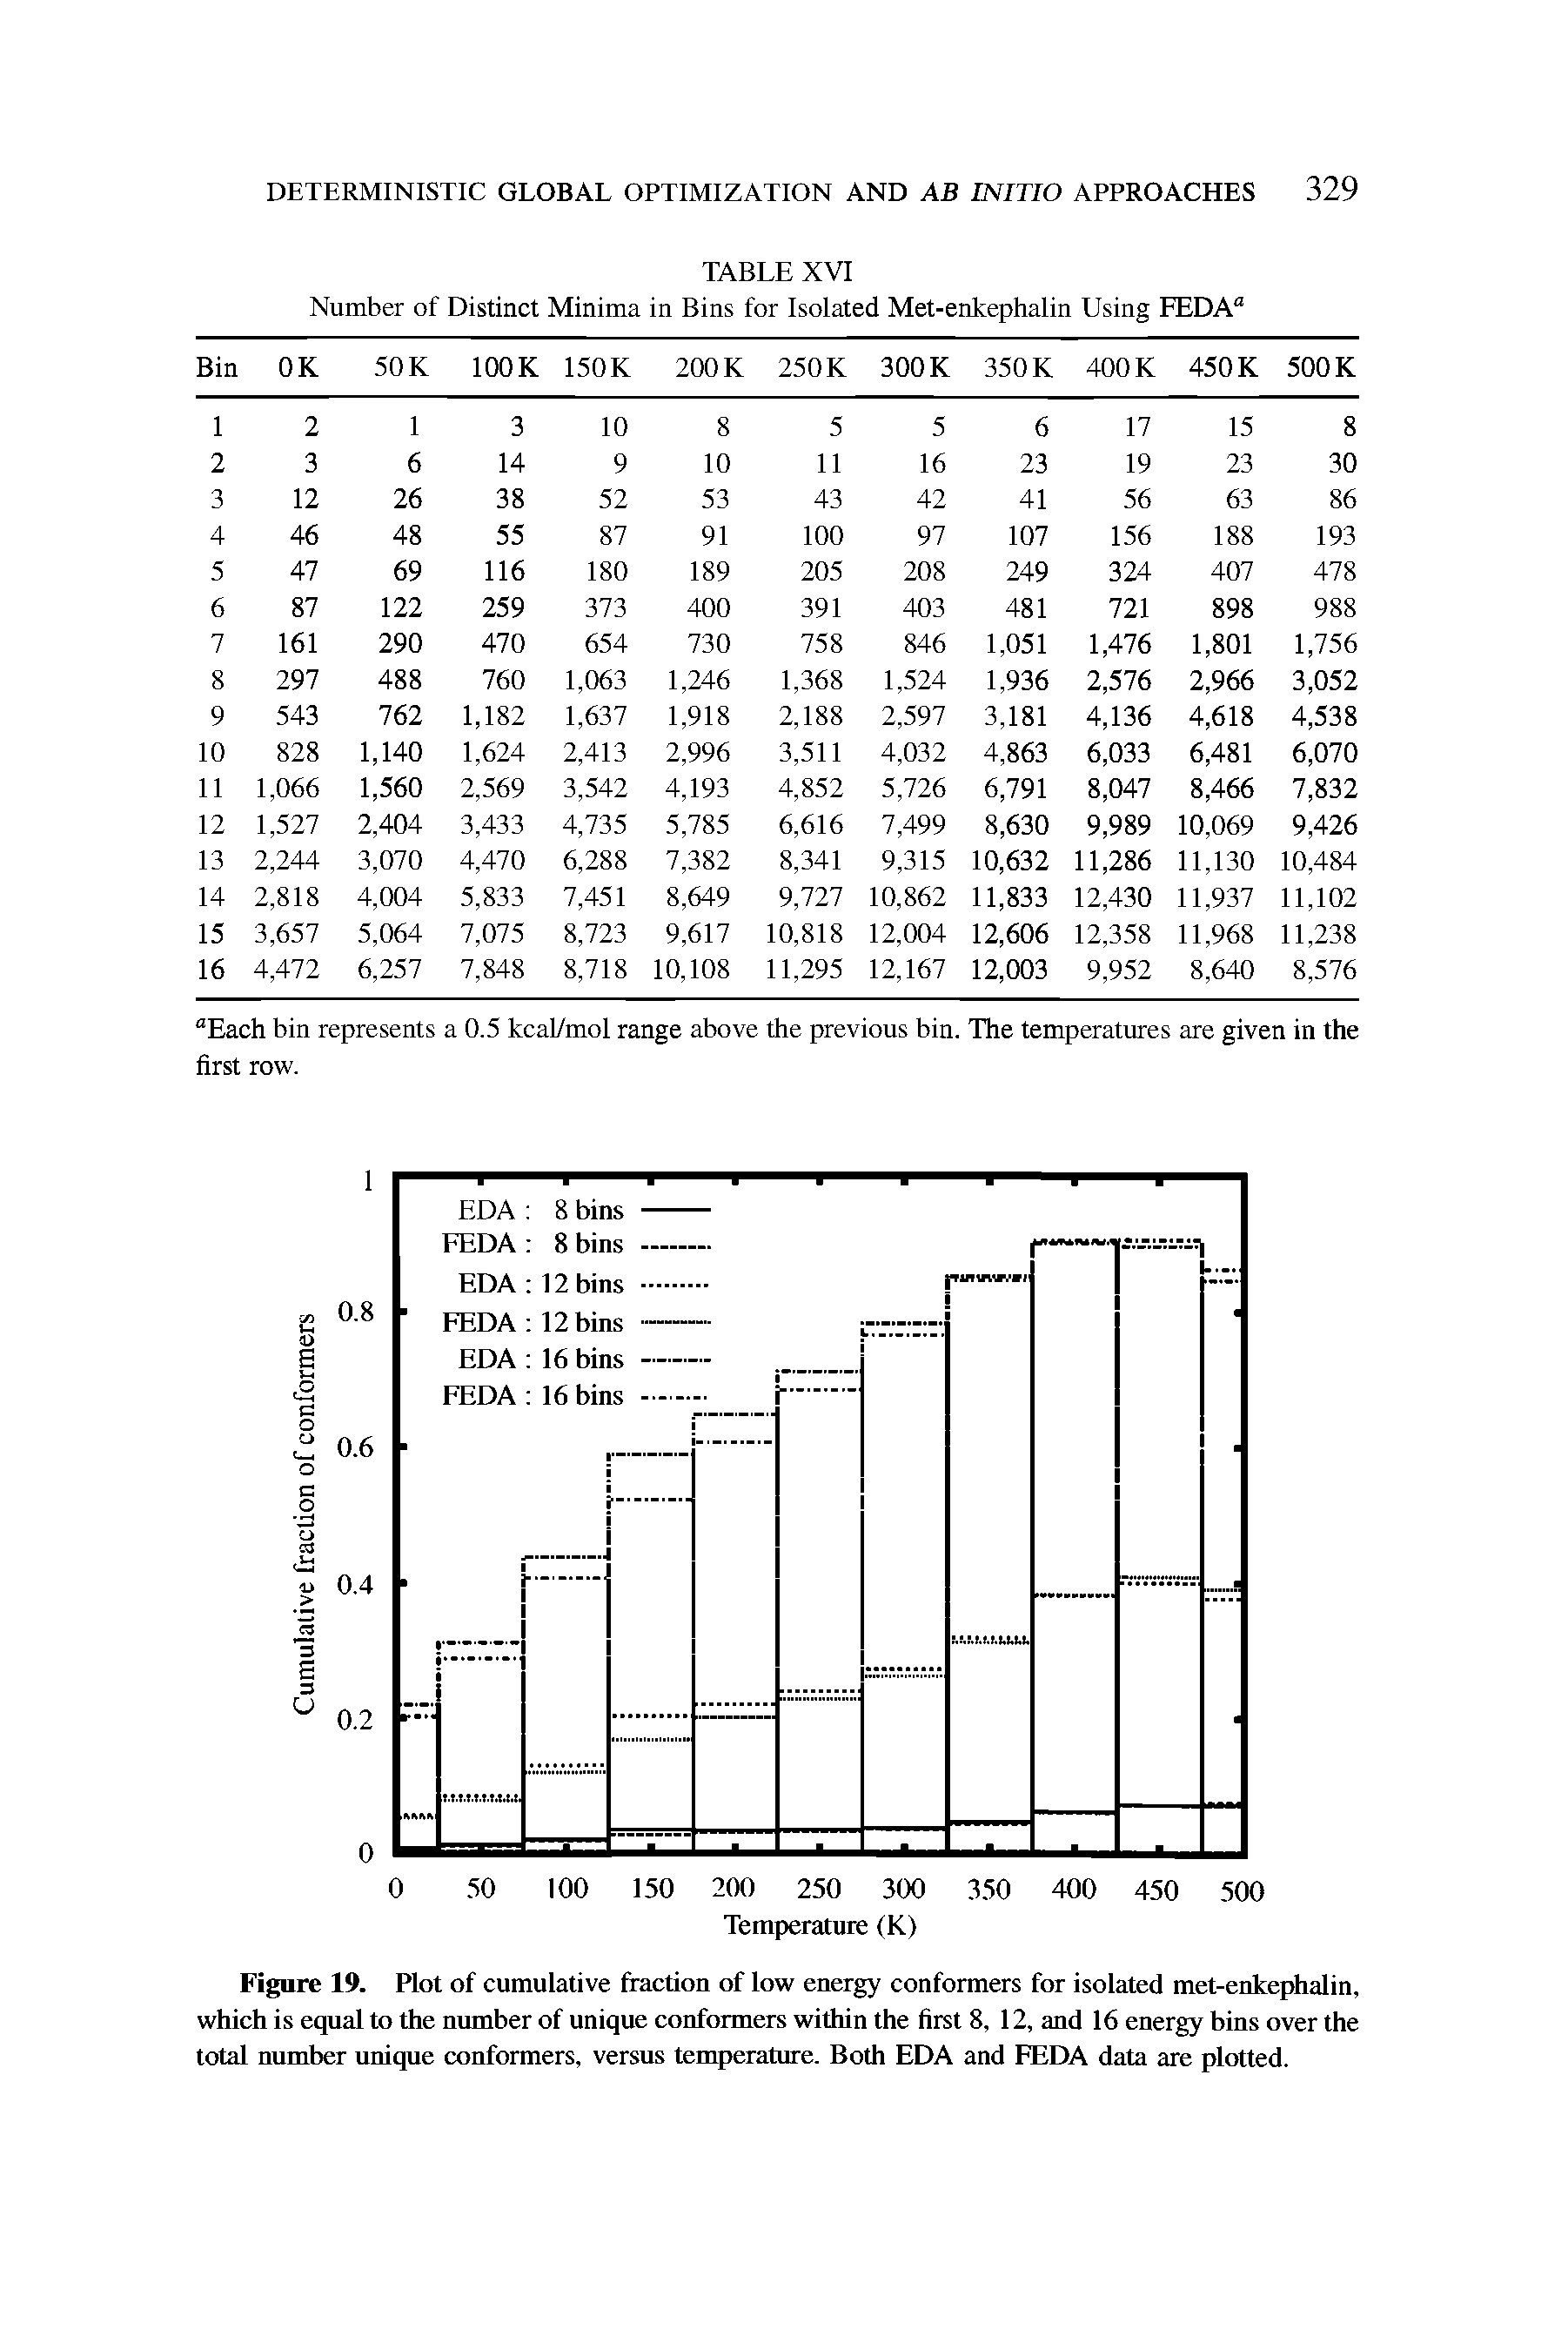 Figure 19. Plot of cumulative fraction of low energy conformers for isolated met-enkephalin, which is equal to the number of unique conformers within the first 8, 12, and 16 energy bins over the total number unique conformers, versus temperature. Both EDA and FEDA data are plotted.